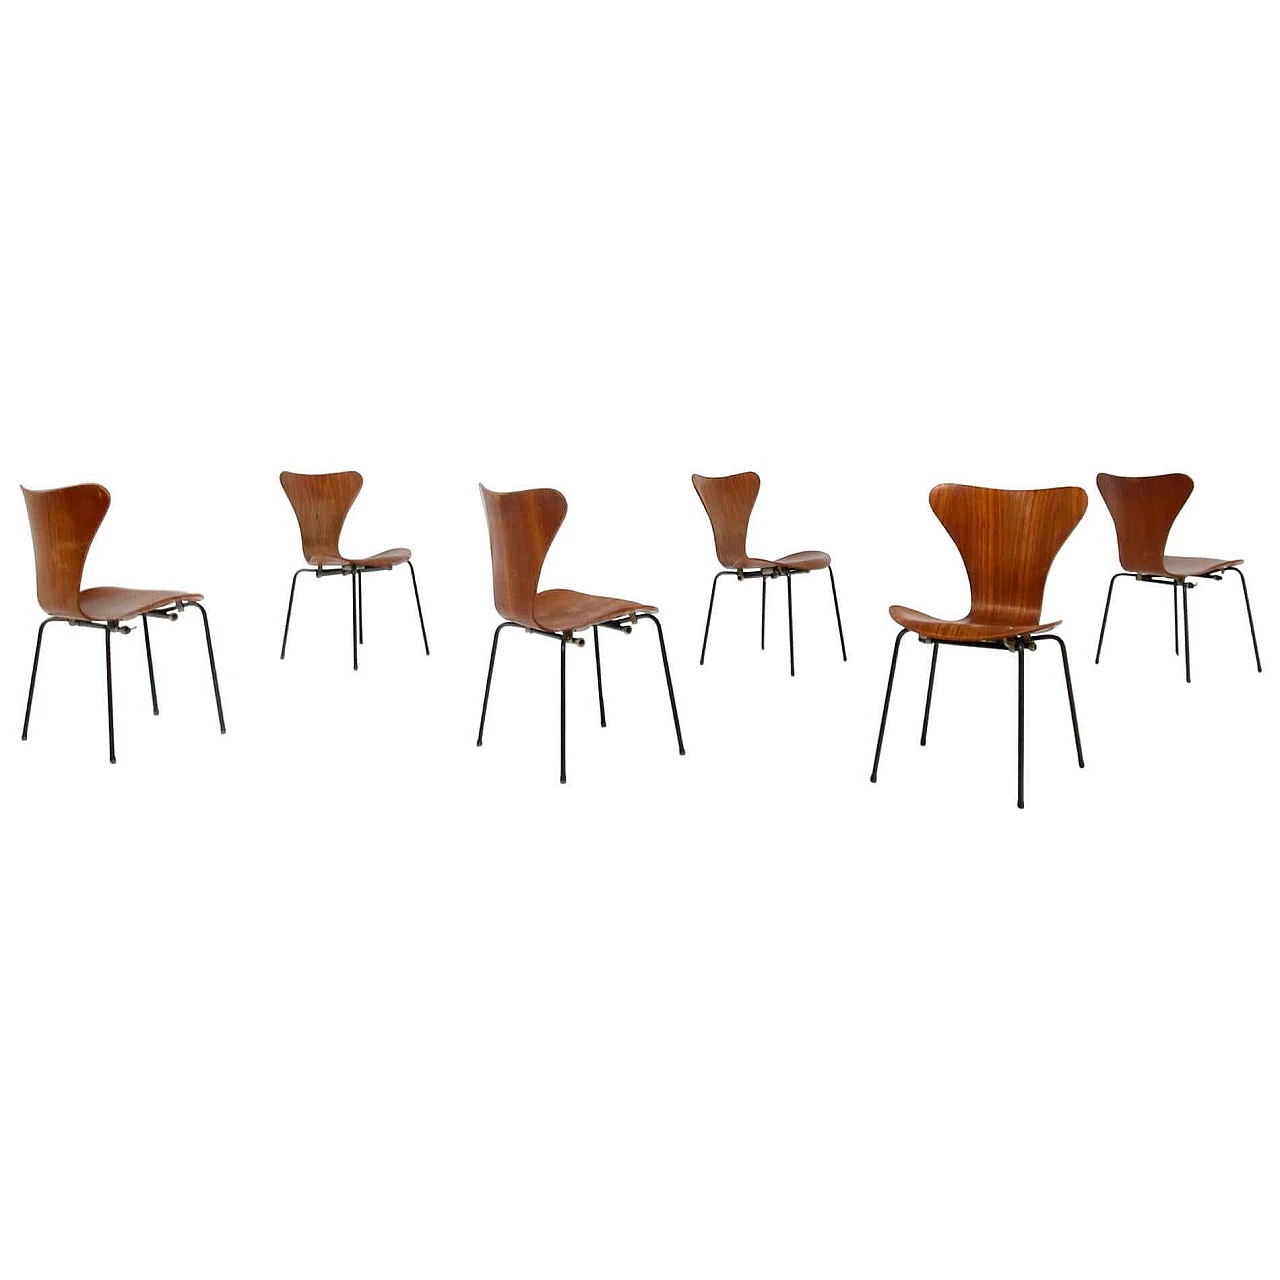 6 Chairs by Arne Jacobsen model Butterfly for the Brazilian airline Varig, 1950s 1387799